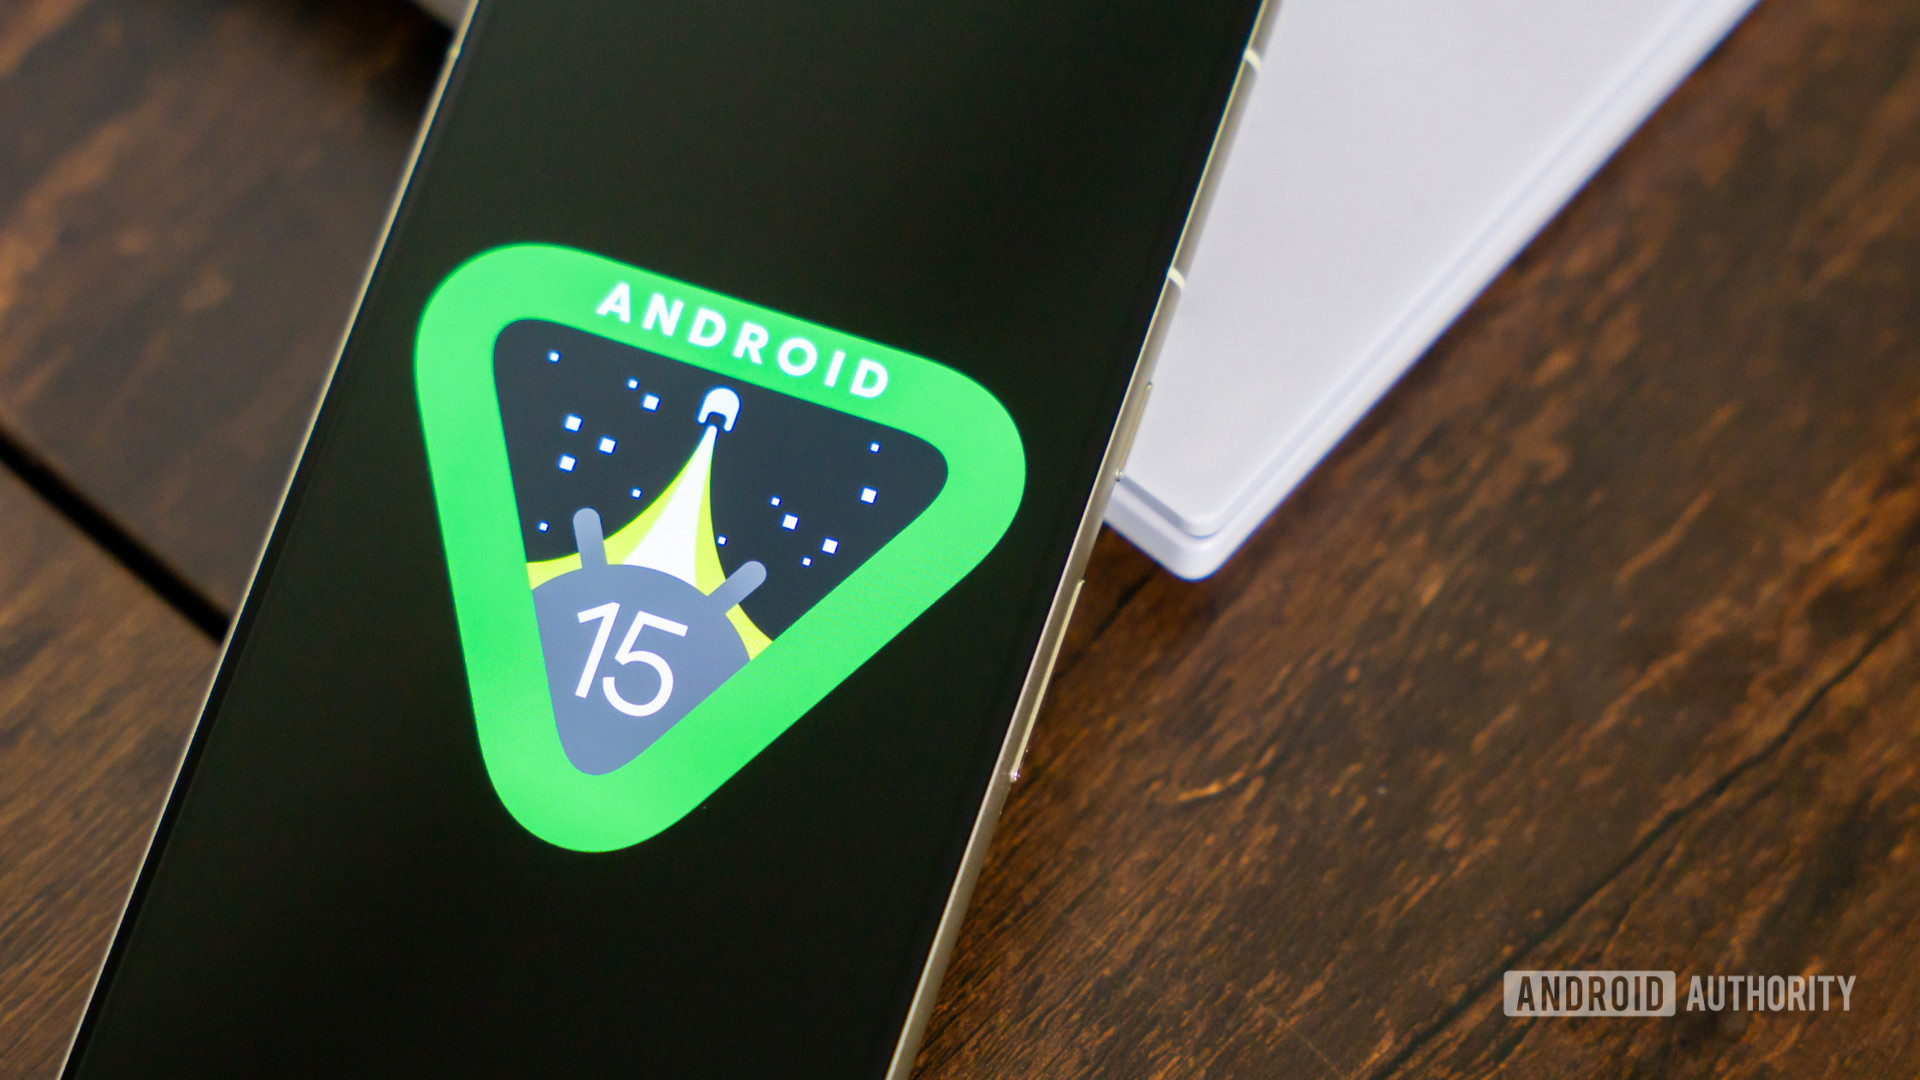 Android 15 logo on smartphone on coffee table stock photo (6)